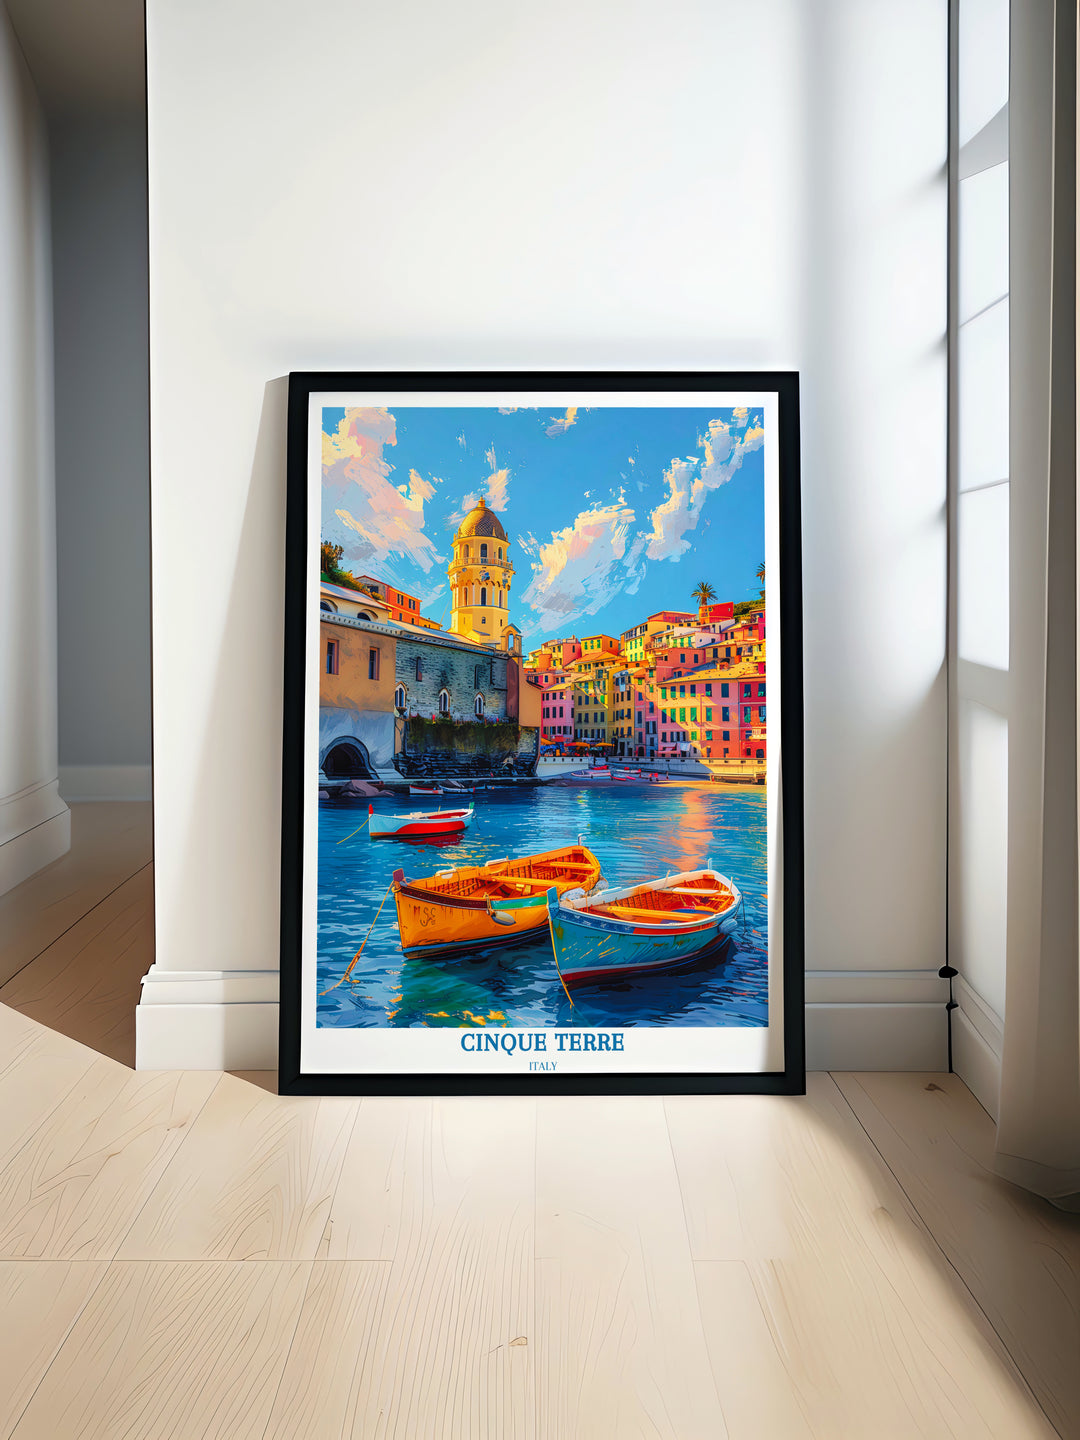 Vibrant Vernazza Print capturing the essence of Cinque Terres picturesque village with its colorful houses and natural harbor ideal for those who love Italian landscapes